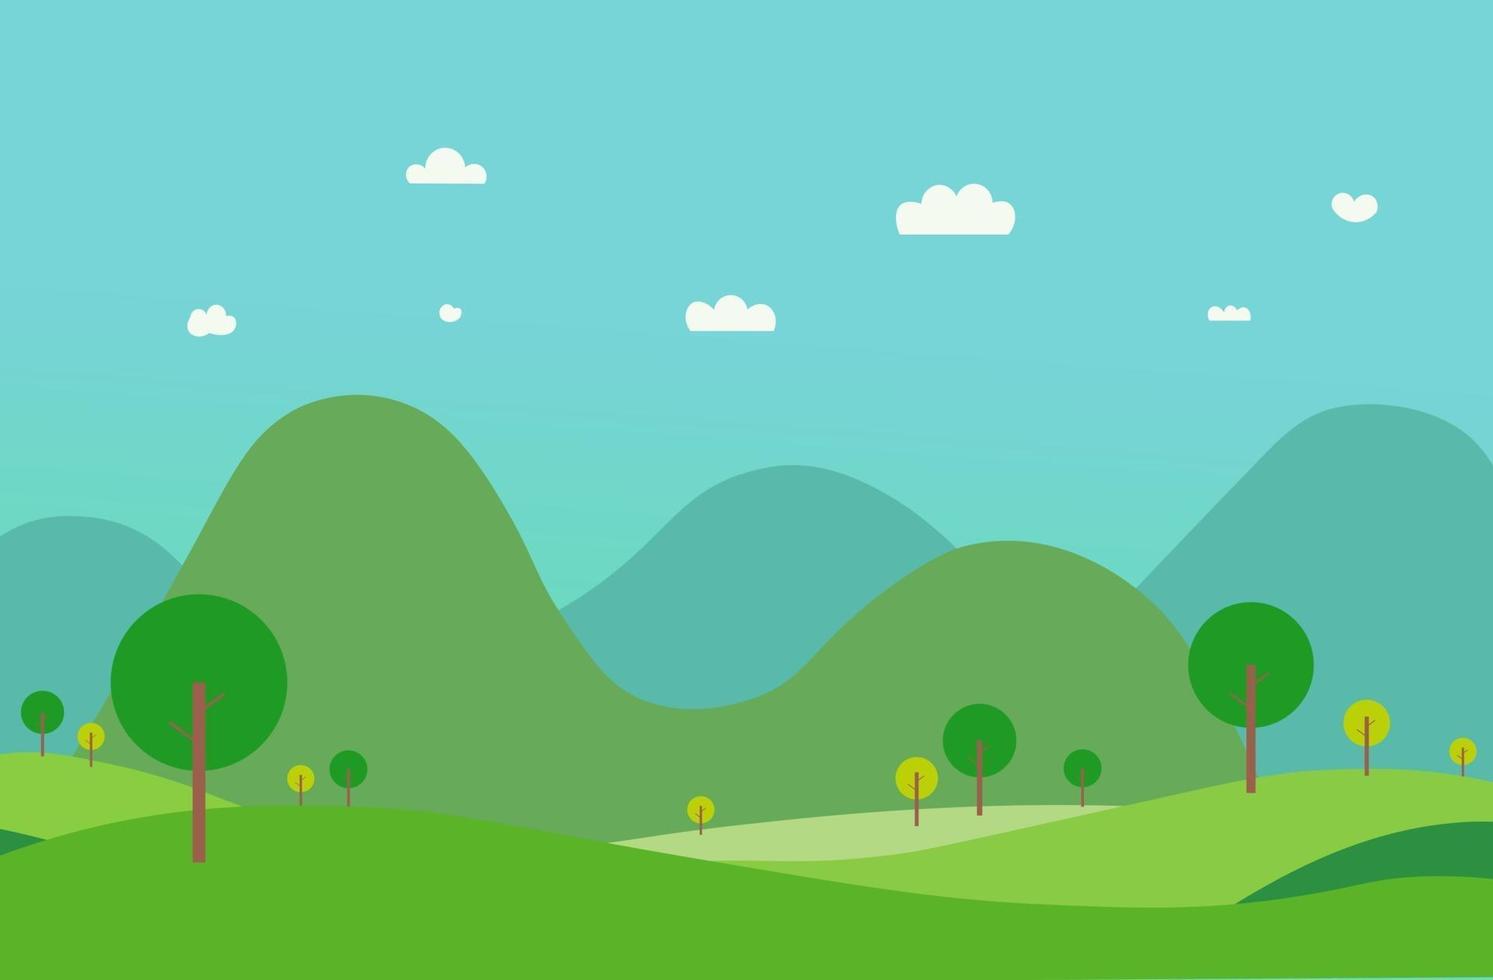 Nature green hills landscape with mountain.Vector illustration.Rural scene flat design.Spring garden with sky background vector